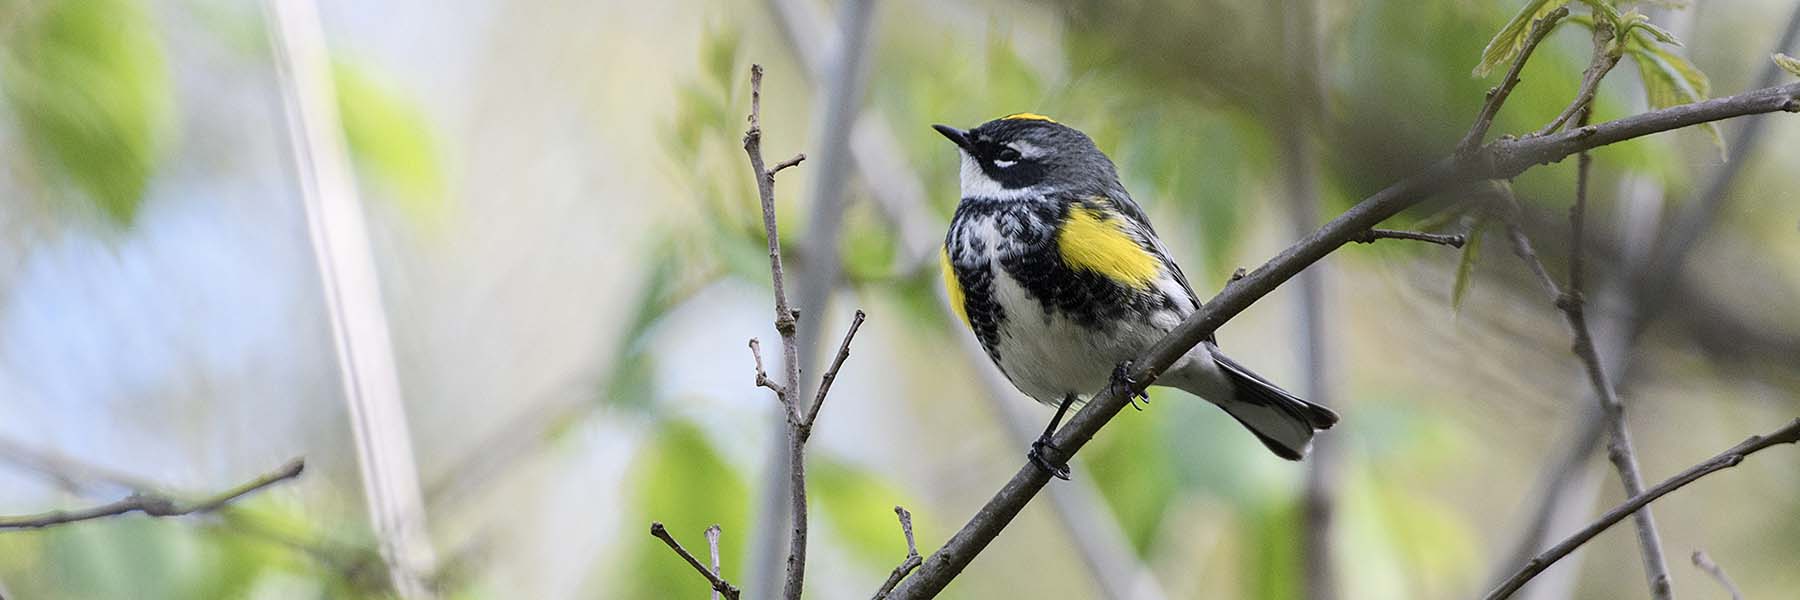 Male Yellow-rumped Warbler perched on a tree twig.